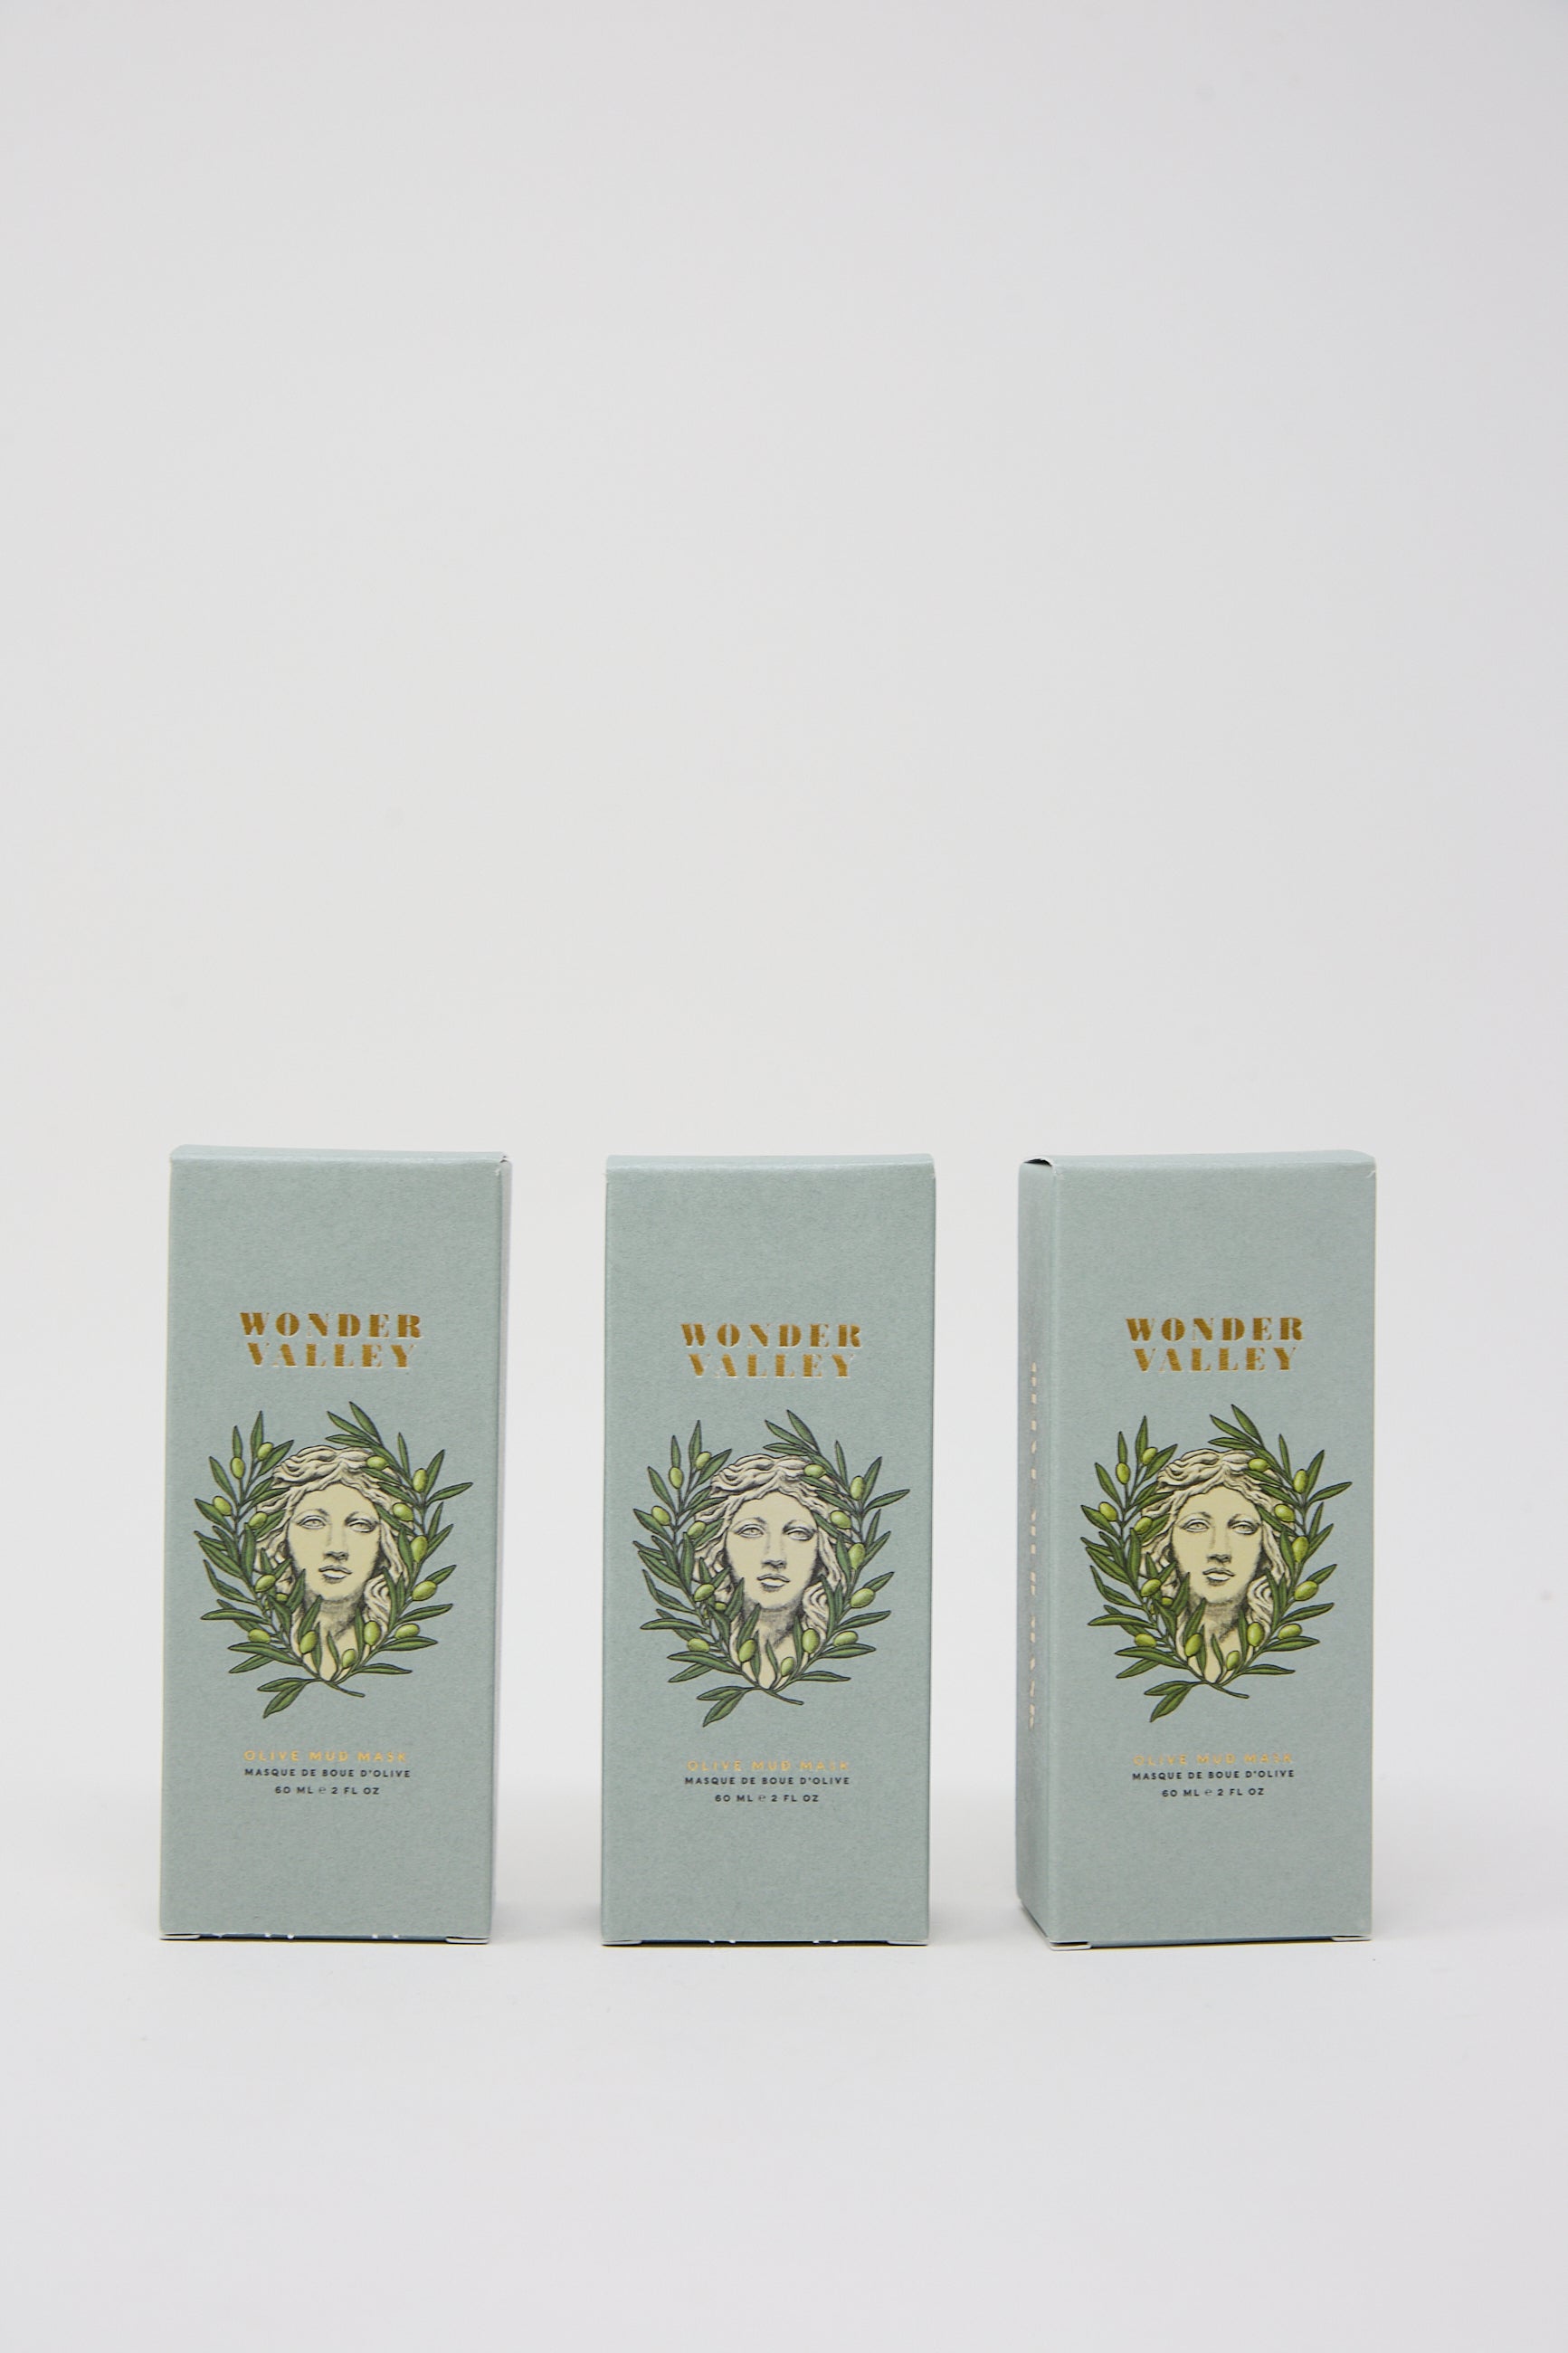 Three boxes labeled "Wonder Valley Olive Mud Mask" with the illustration of a woman's face surrounded by leaves on a white background.